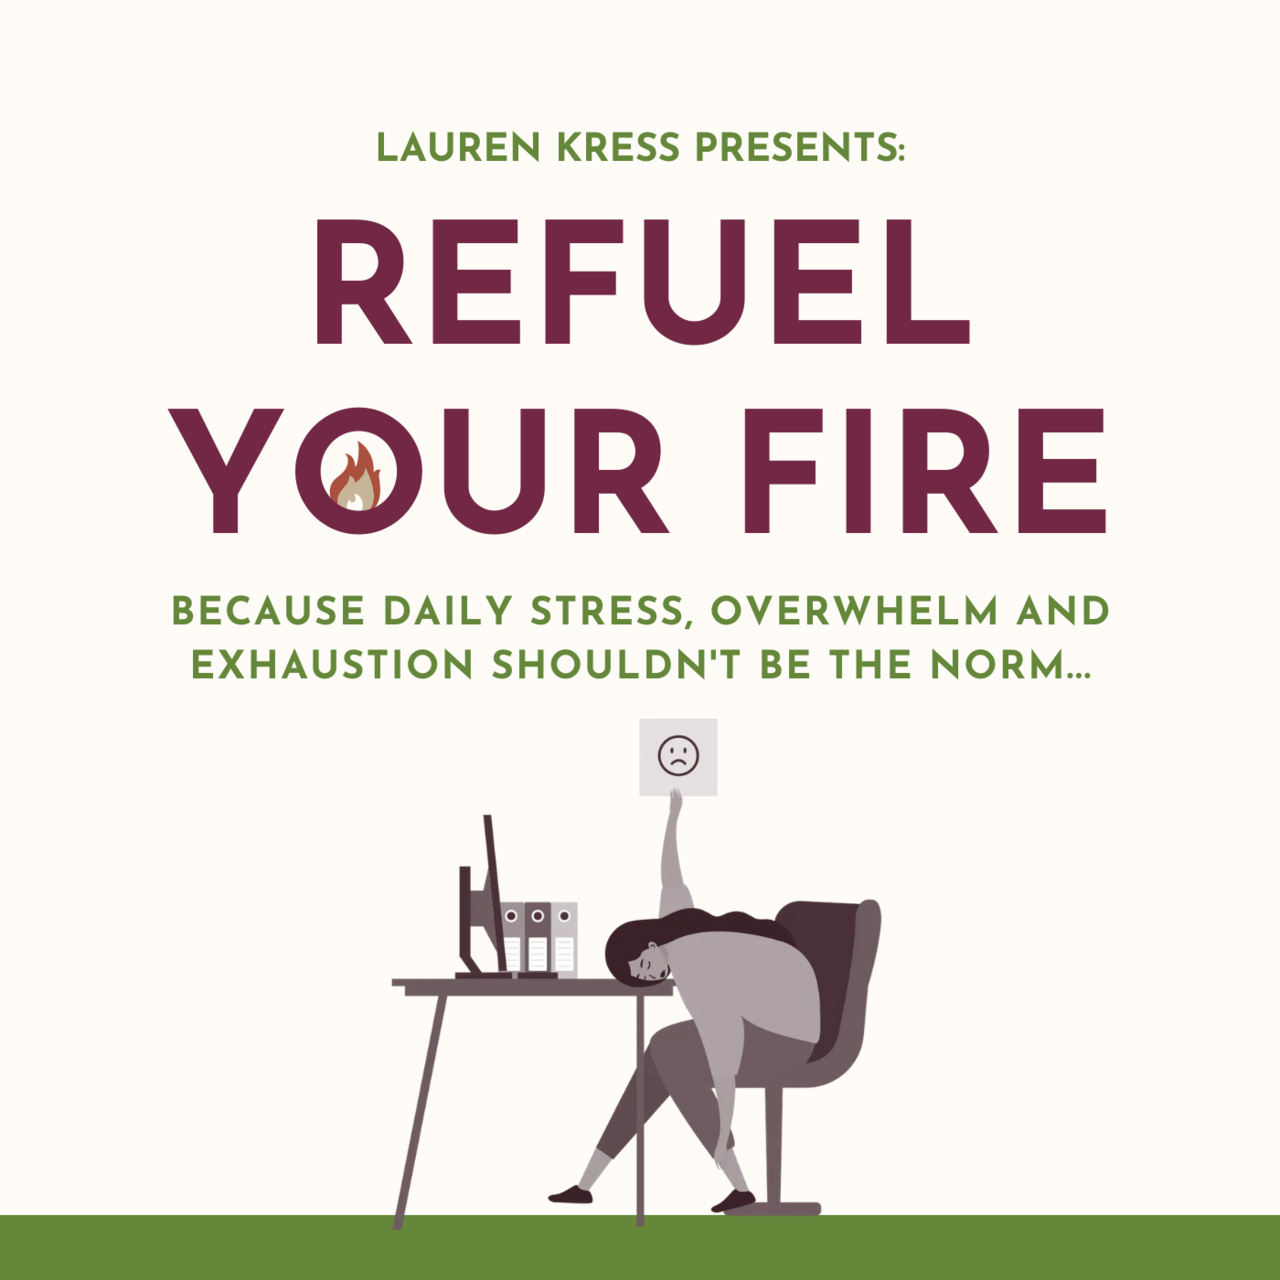 Five Ways to Refuel Your Fire